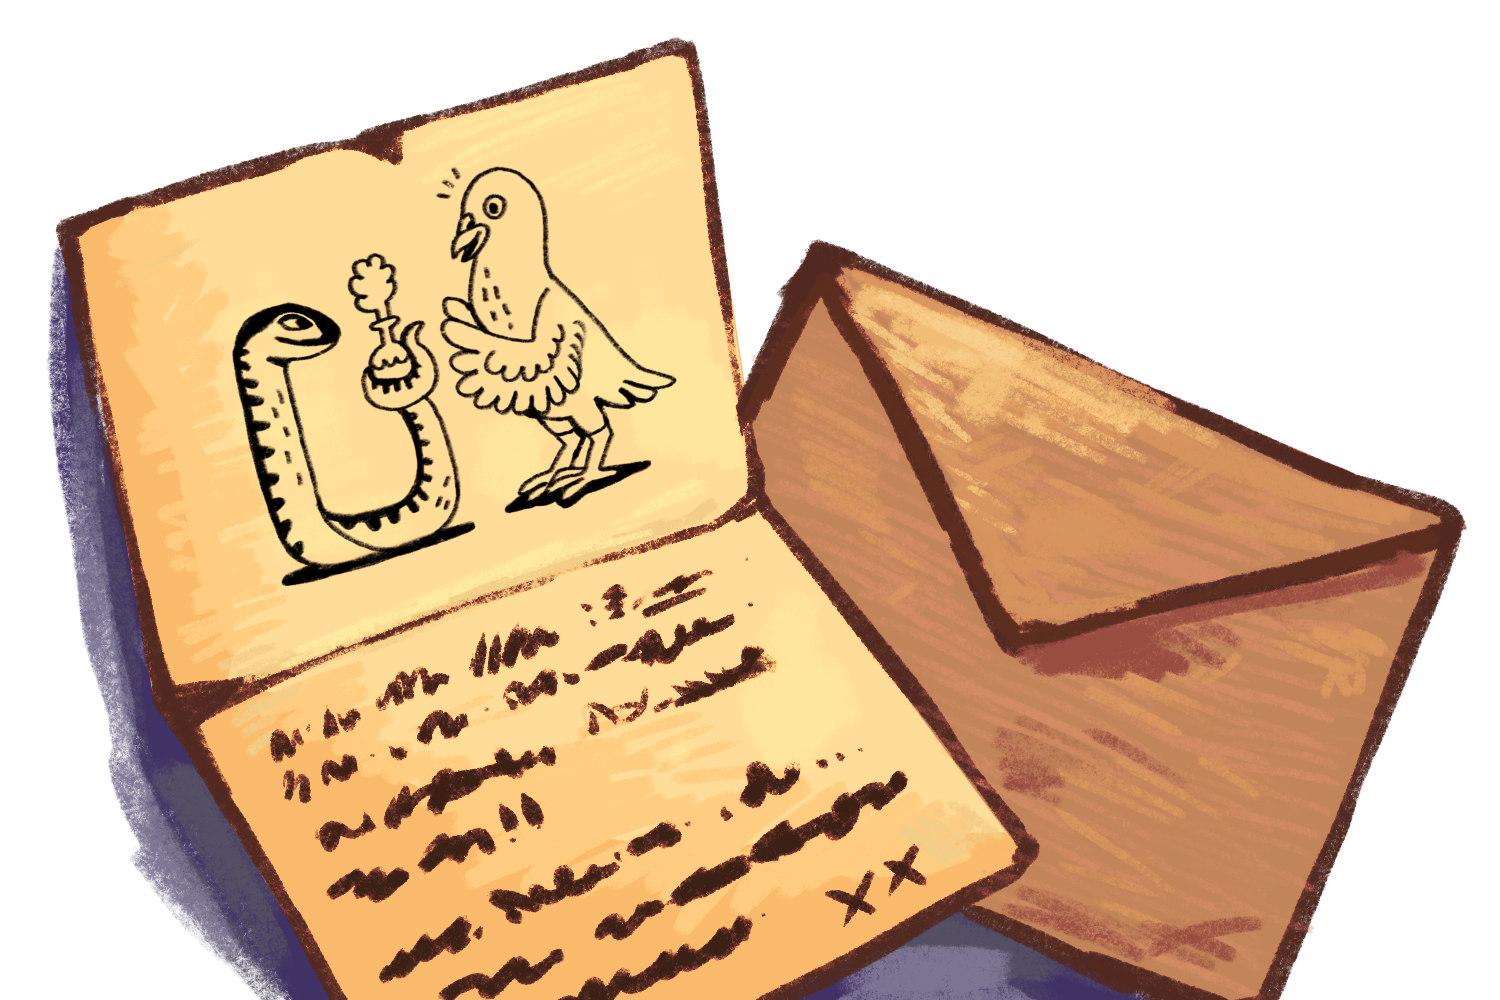 Image. A drawing of an open letter laid on a closed envelope. The letter has an illustration of a Pidgeon helping a snake brew a potion.